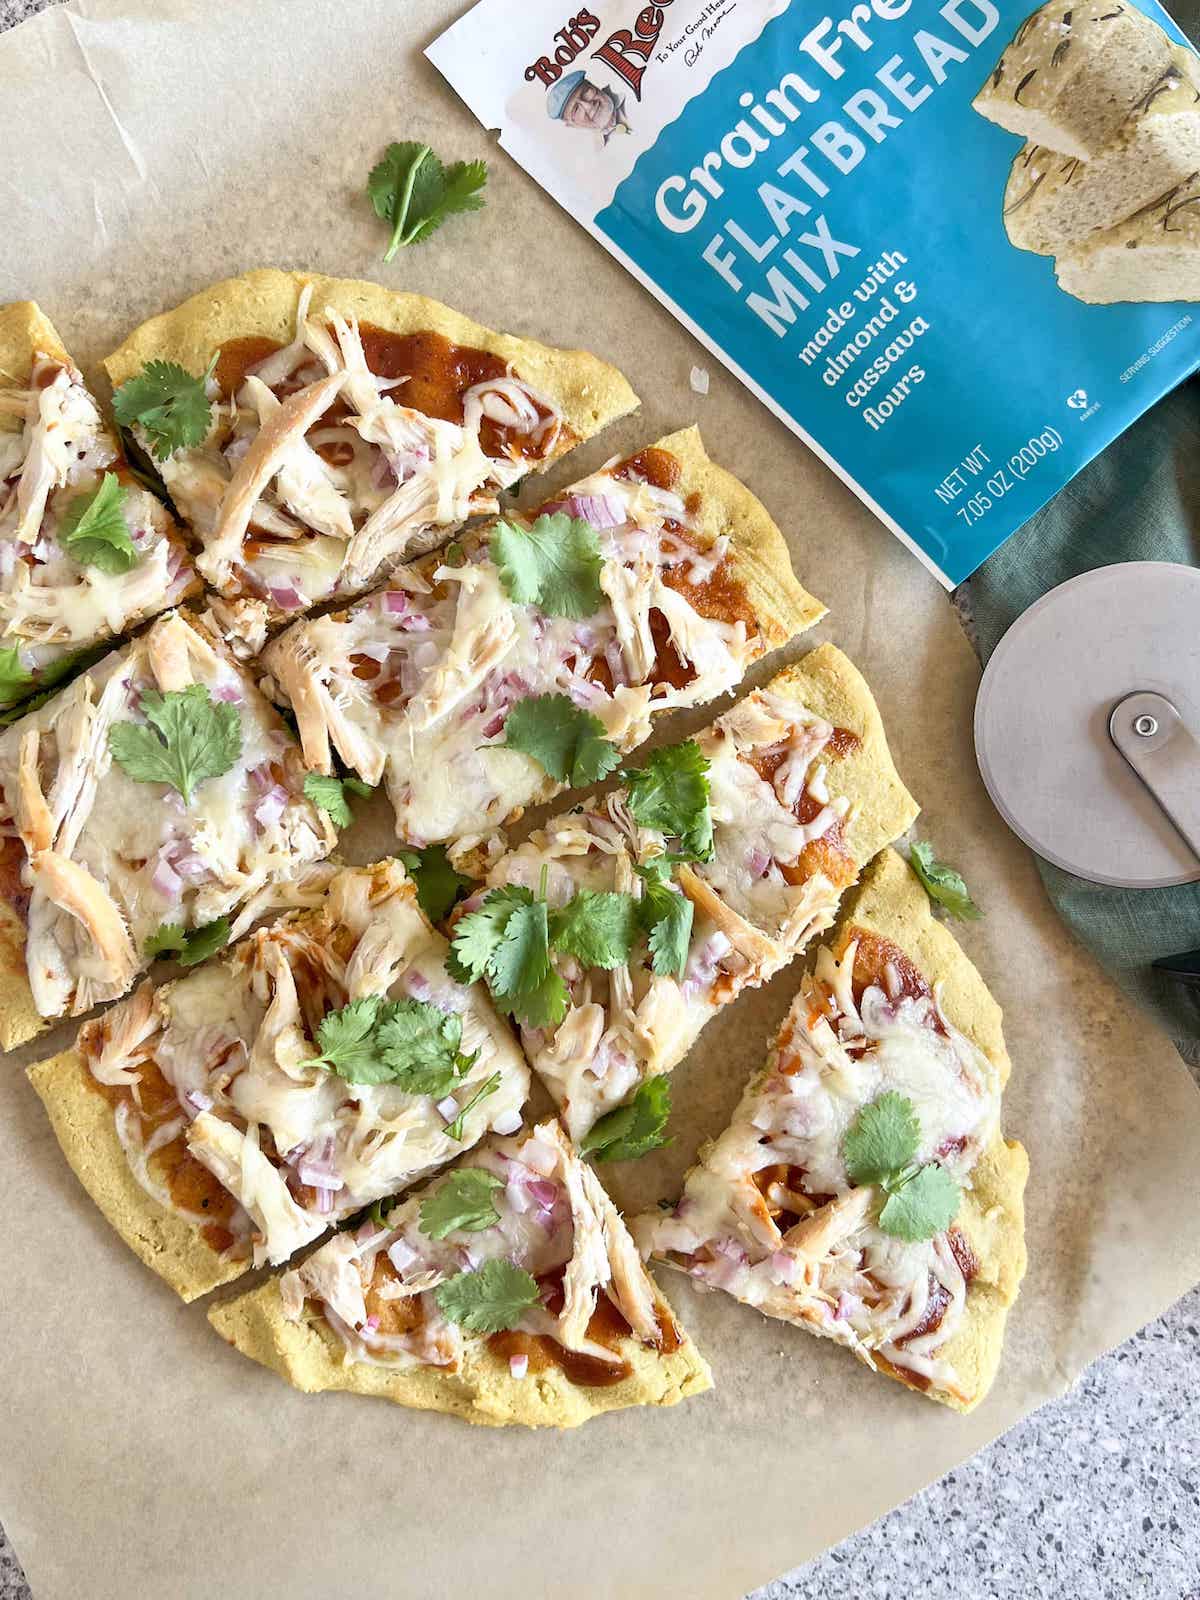 BBQ chicken flatbread pizza cut into pieces next to a pizza cutter and a bag of Bob's Red Mill flatbread mix.